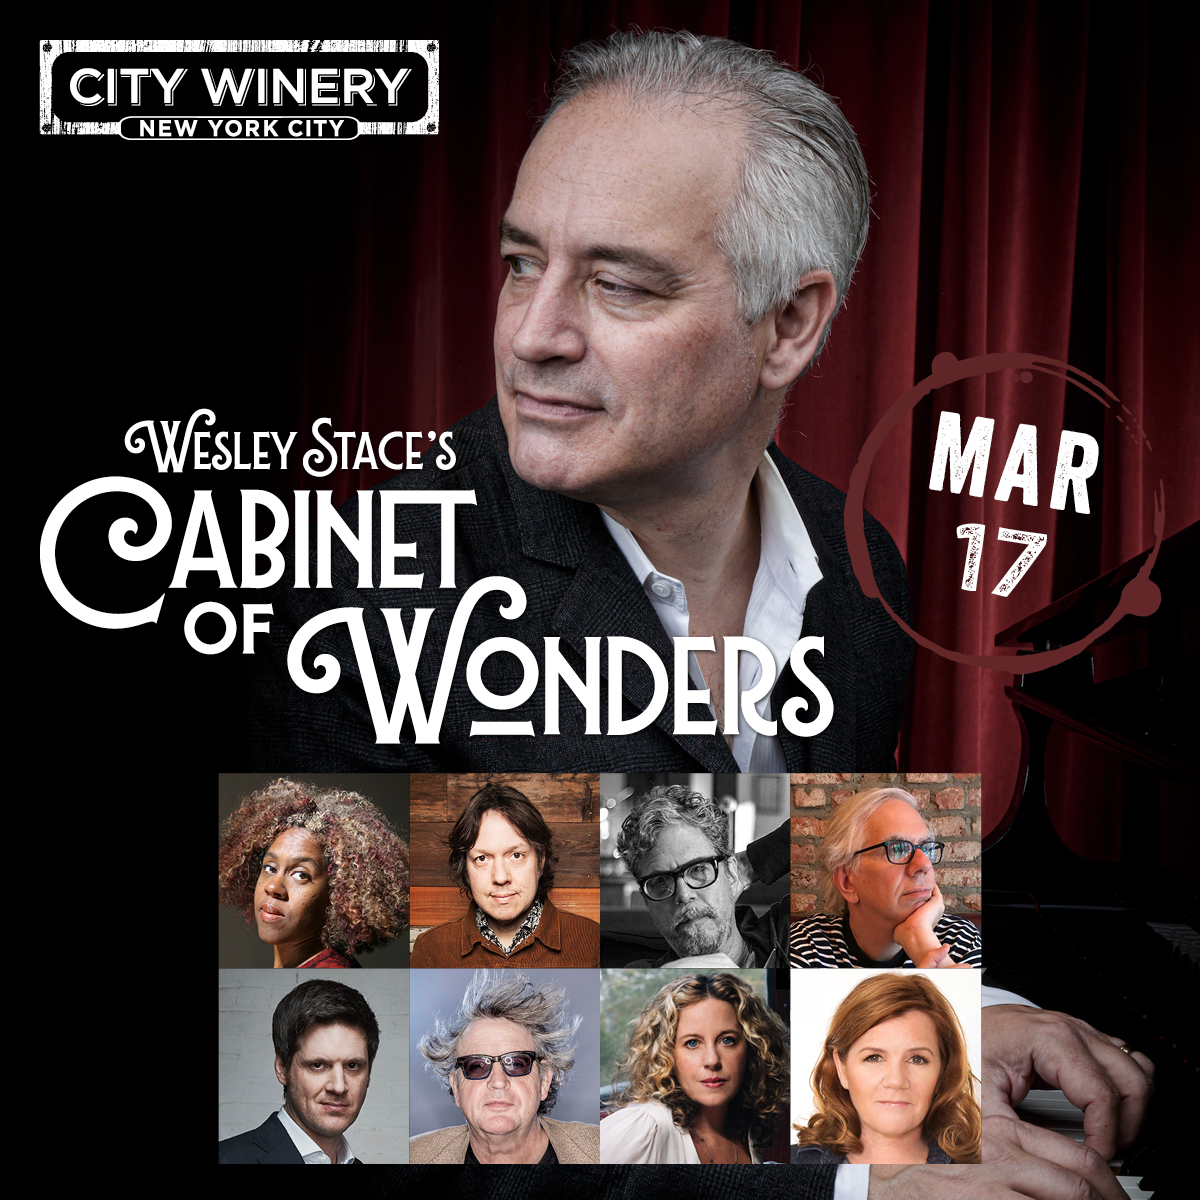 THIS SUNDAY (3/17): a special St. Paddy's day Cabinet Of Wonders at @CityWineryNYC with @WesleyStace, Gary Louris, Amy Helm, Michael James Esper, Dave Hill, Ira Robbins, Paul Muldoon, Errollyn Wallen & Mare Winningham. Tons o' fun & surprises in store. tinyurl.com/Cabinet111